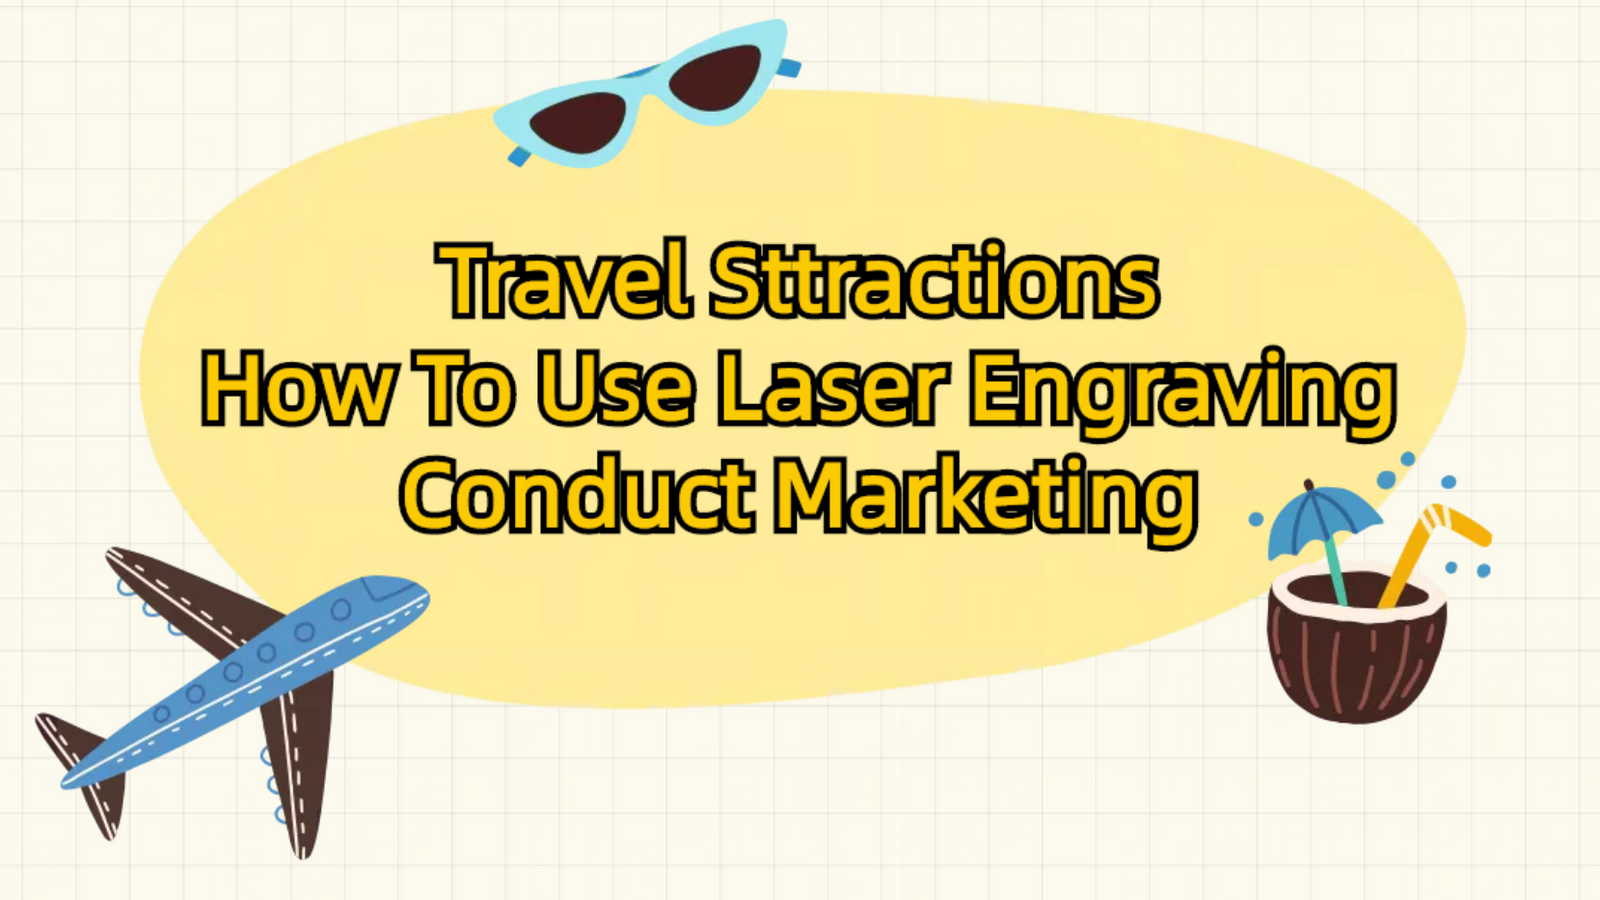 How tourist attractions use laser engraving machines for marketing